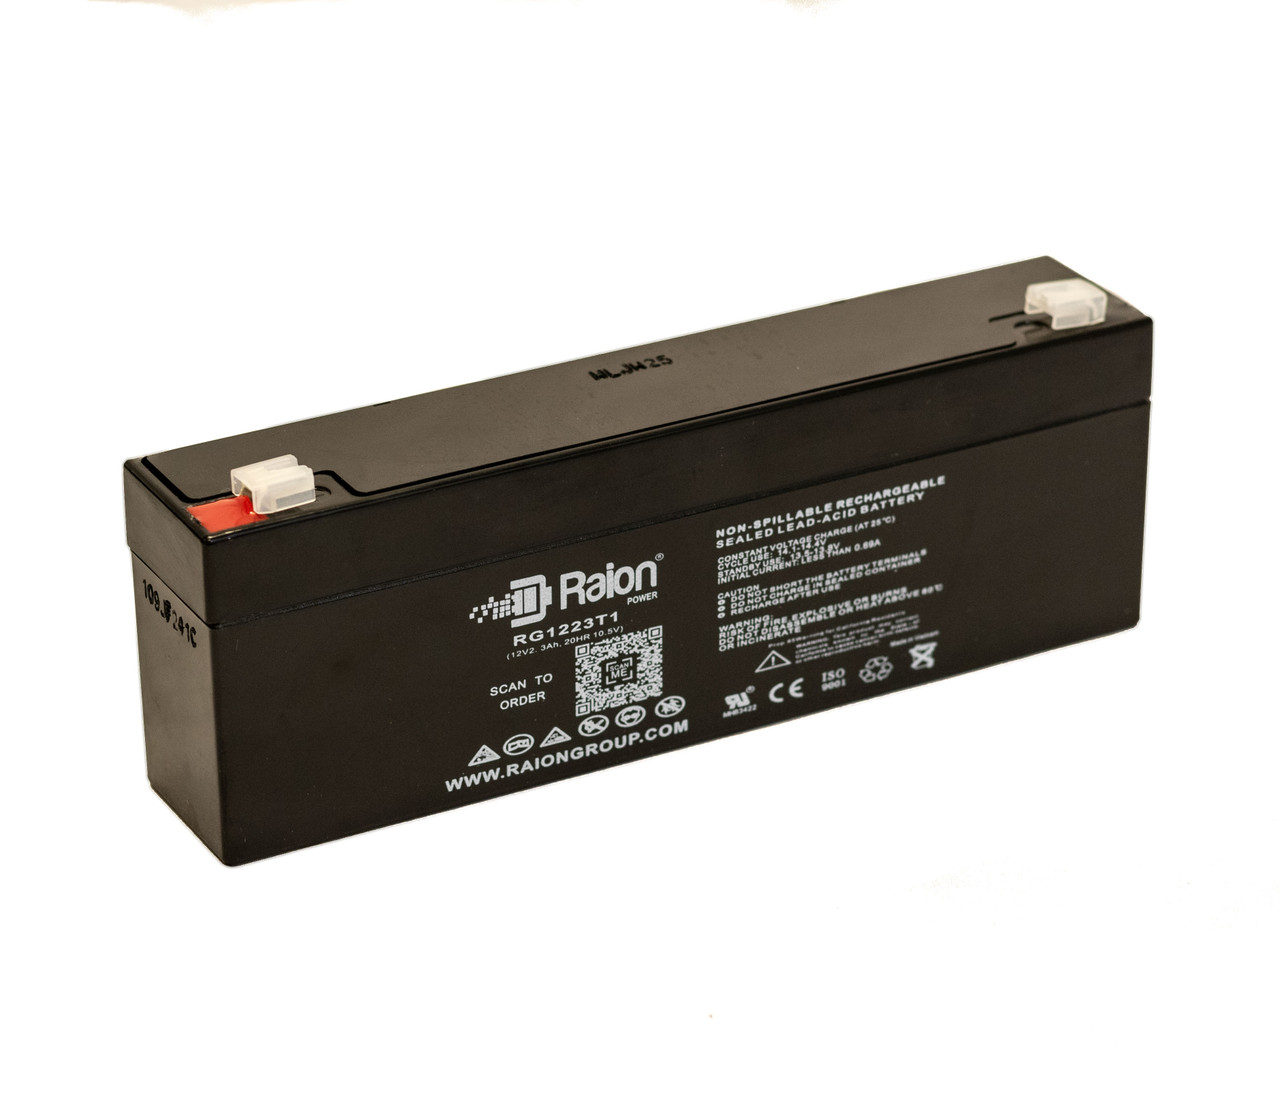 Raion Power RG1223T1 Replacement Battery for Criticare Systems 507ES, 507N Patient Monitor